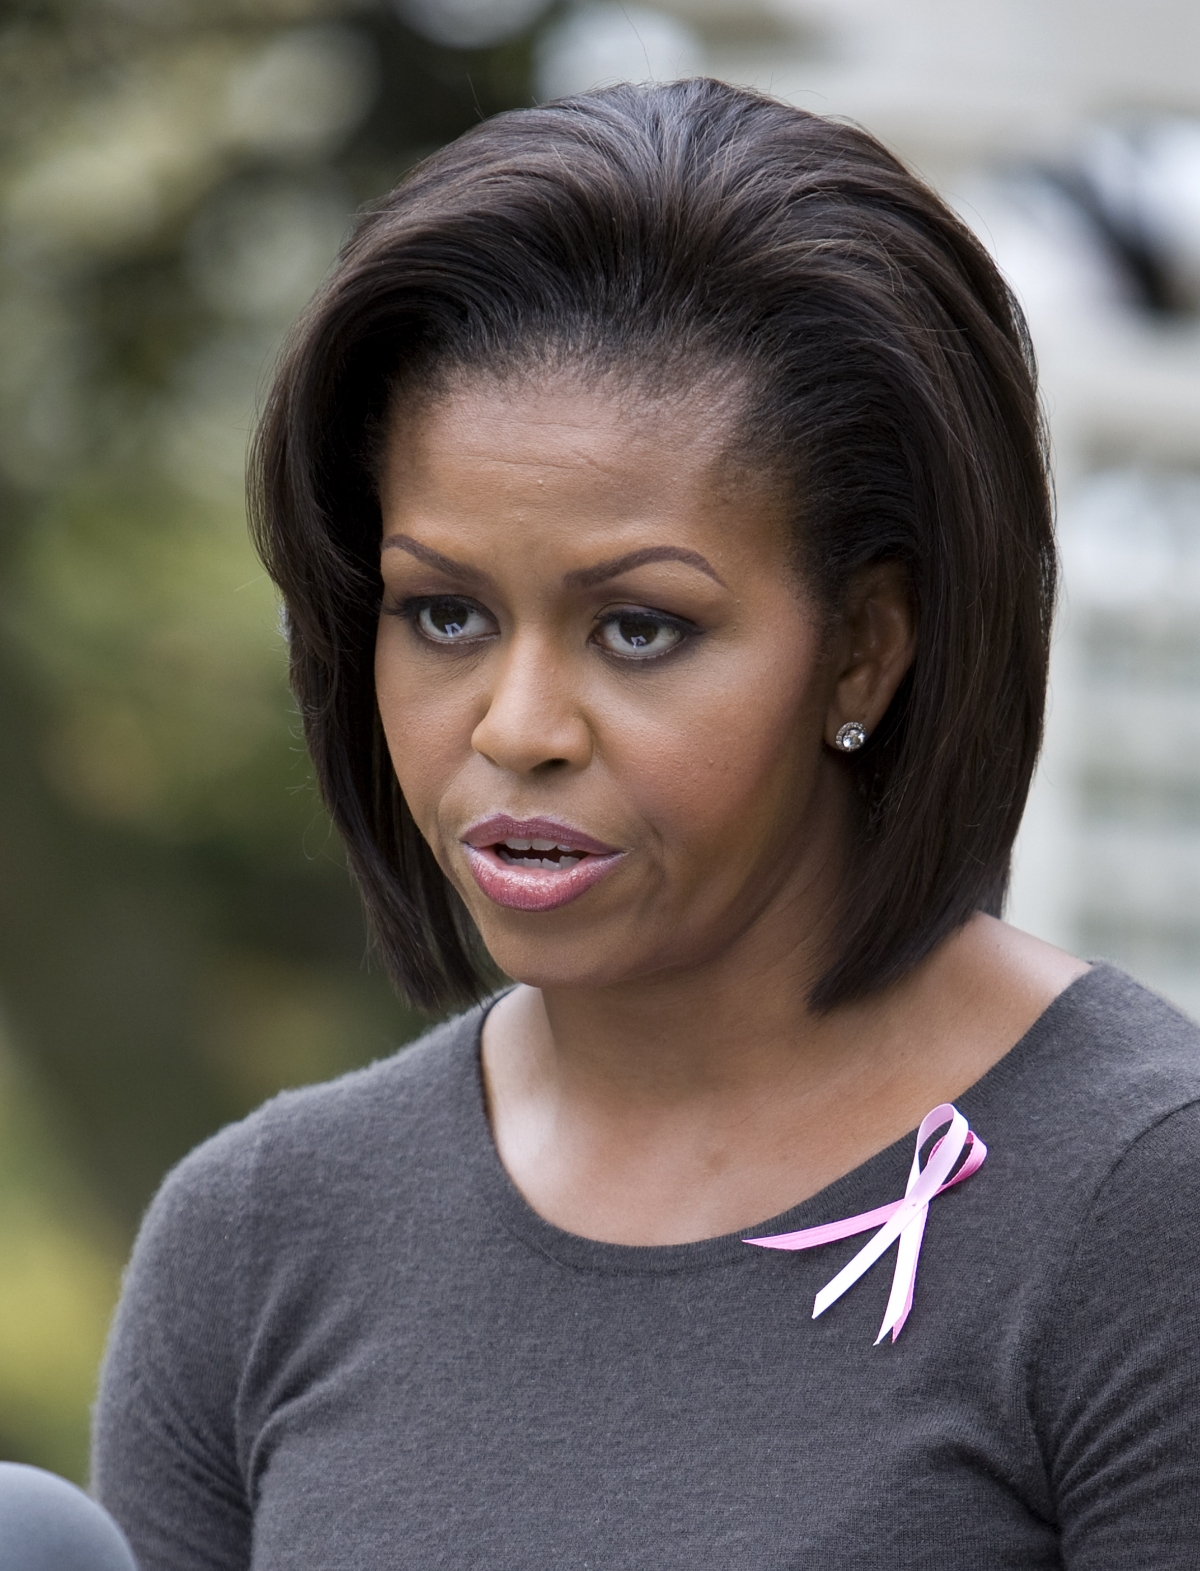 Michelle Obama says she has